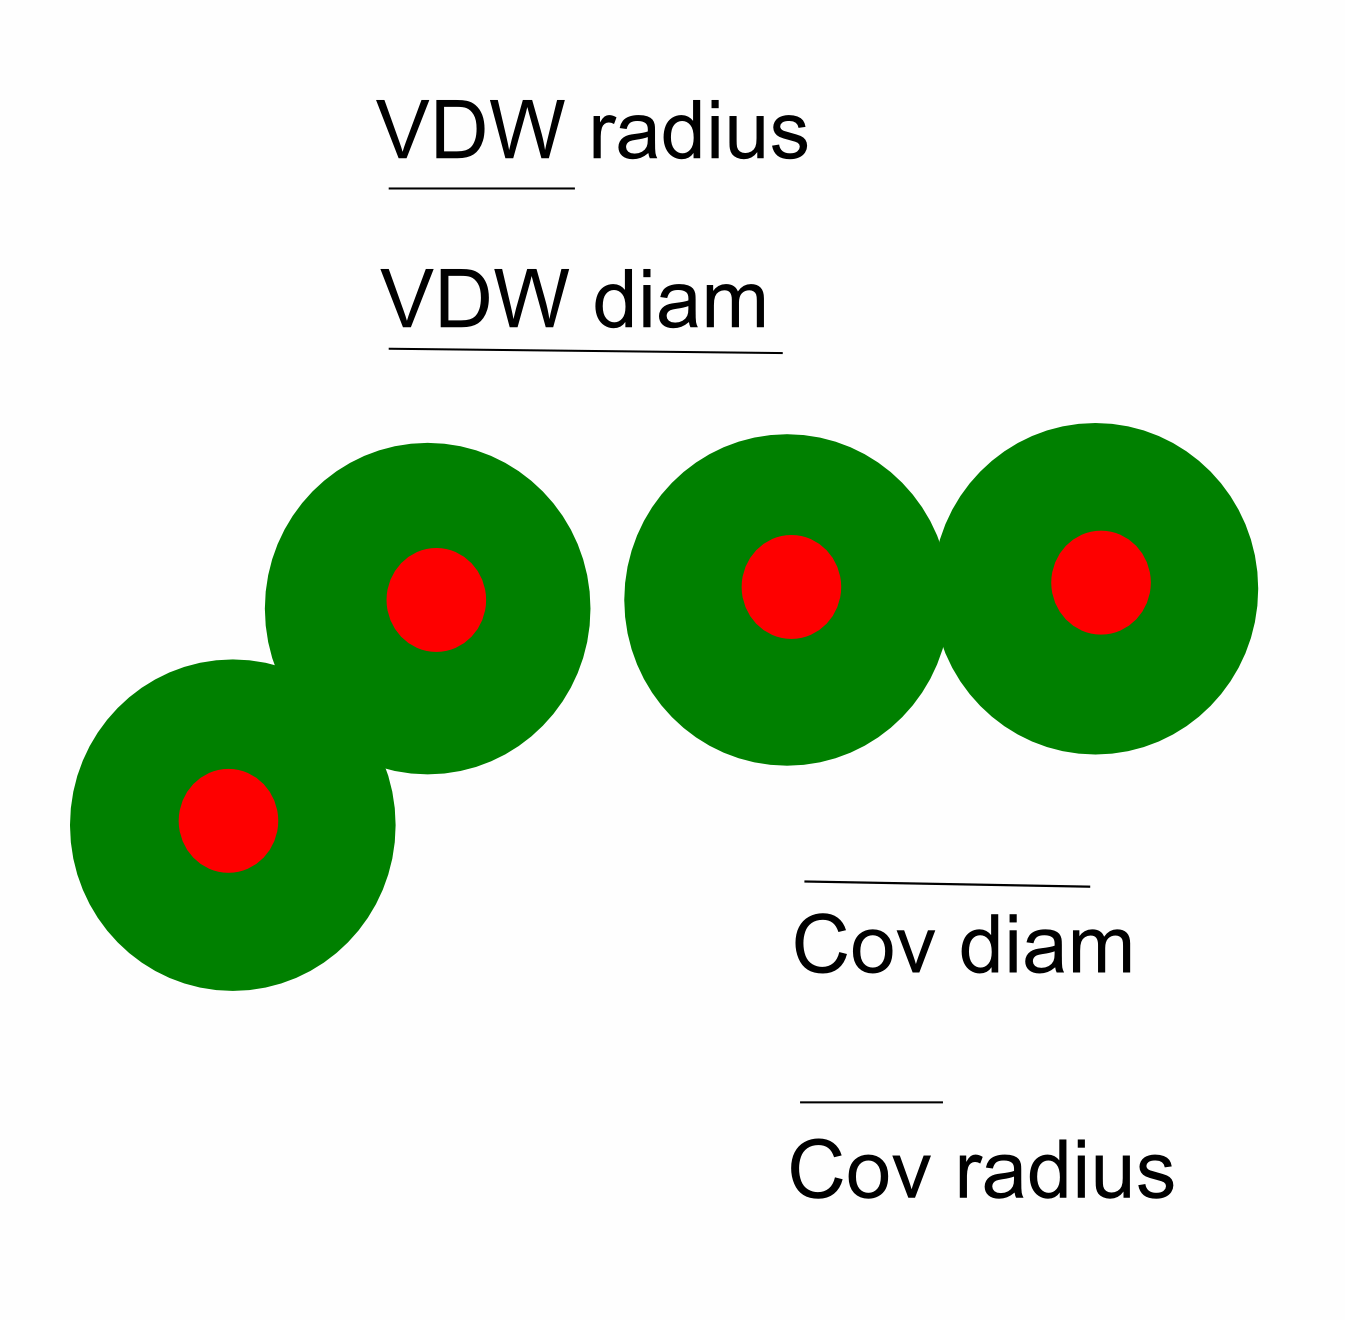 comparison of covalent and VDW radii